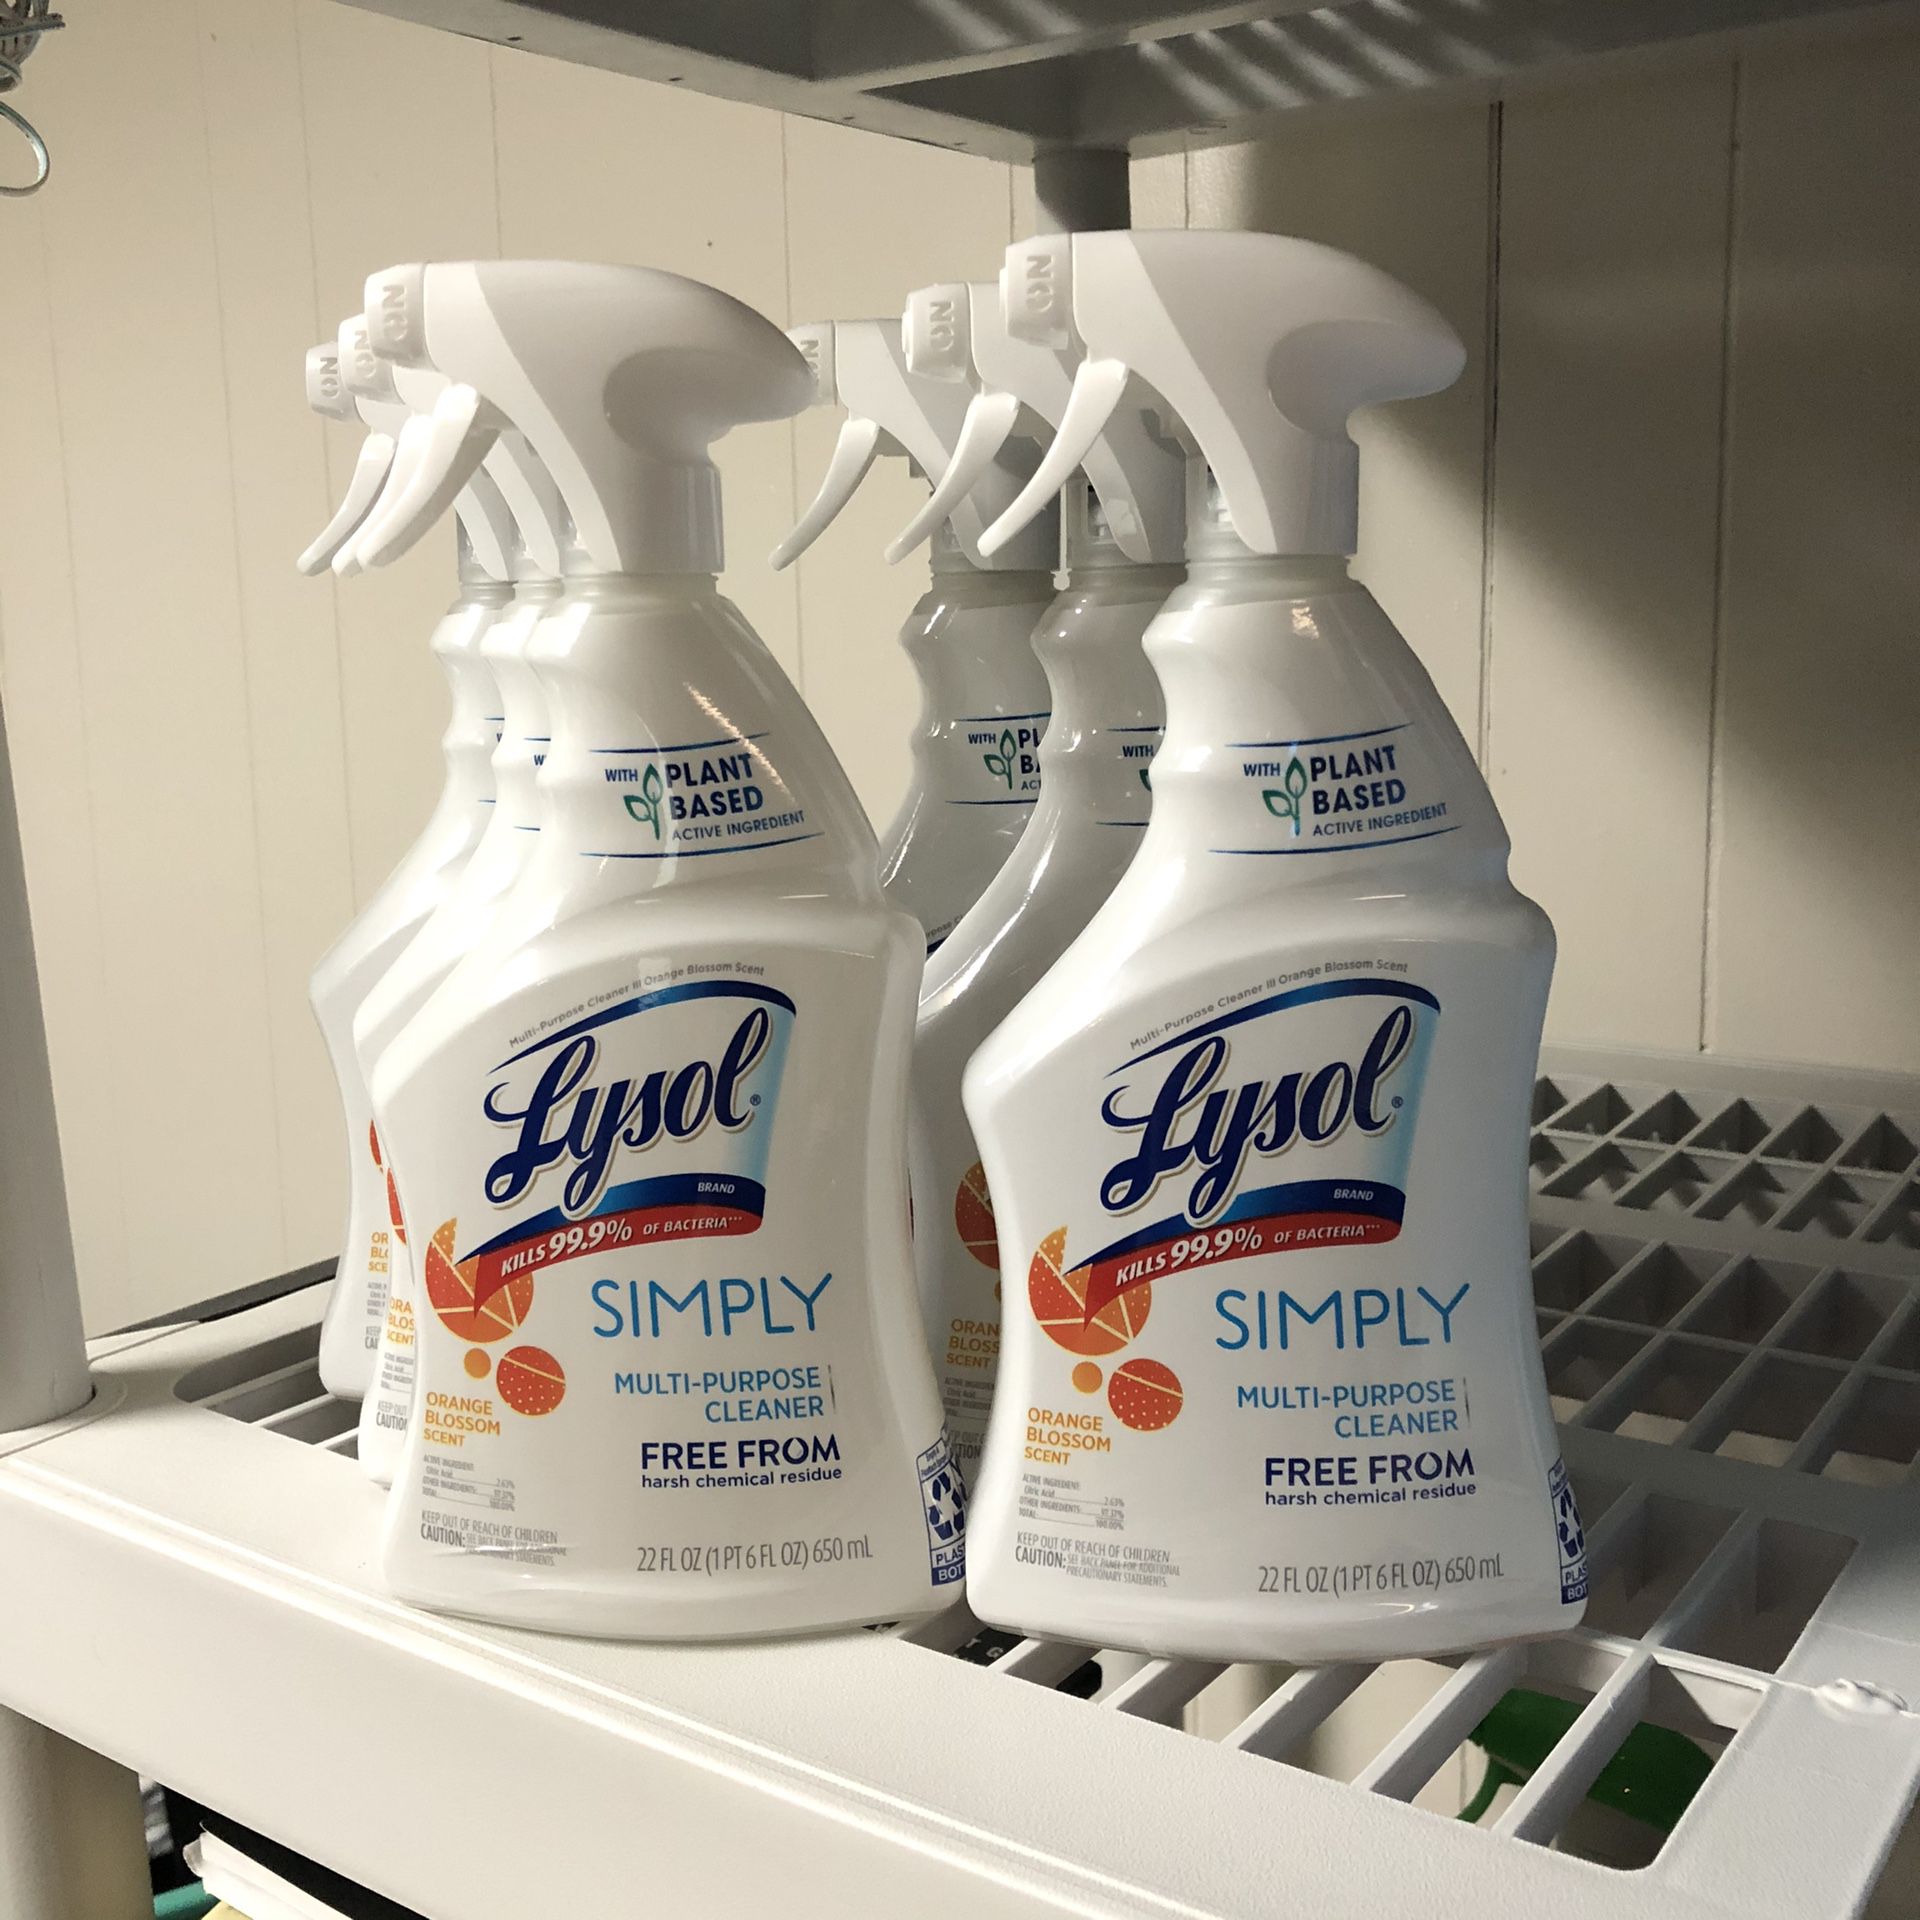 Lysol simply multi-purpose cleaner plant-based chemical free